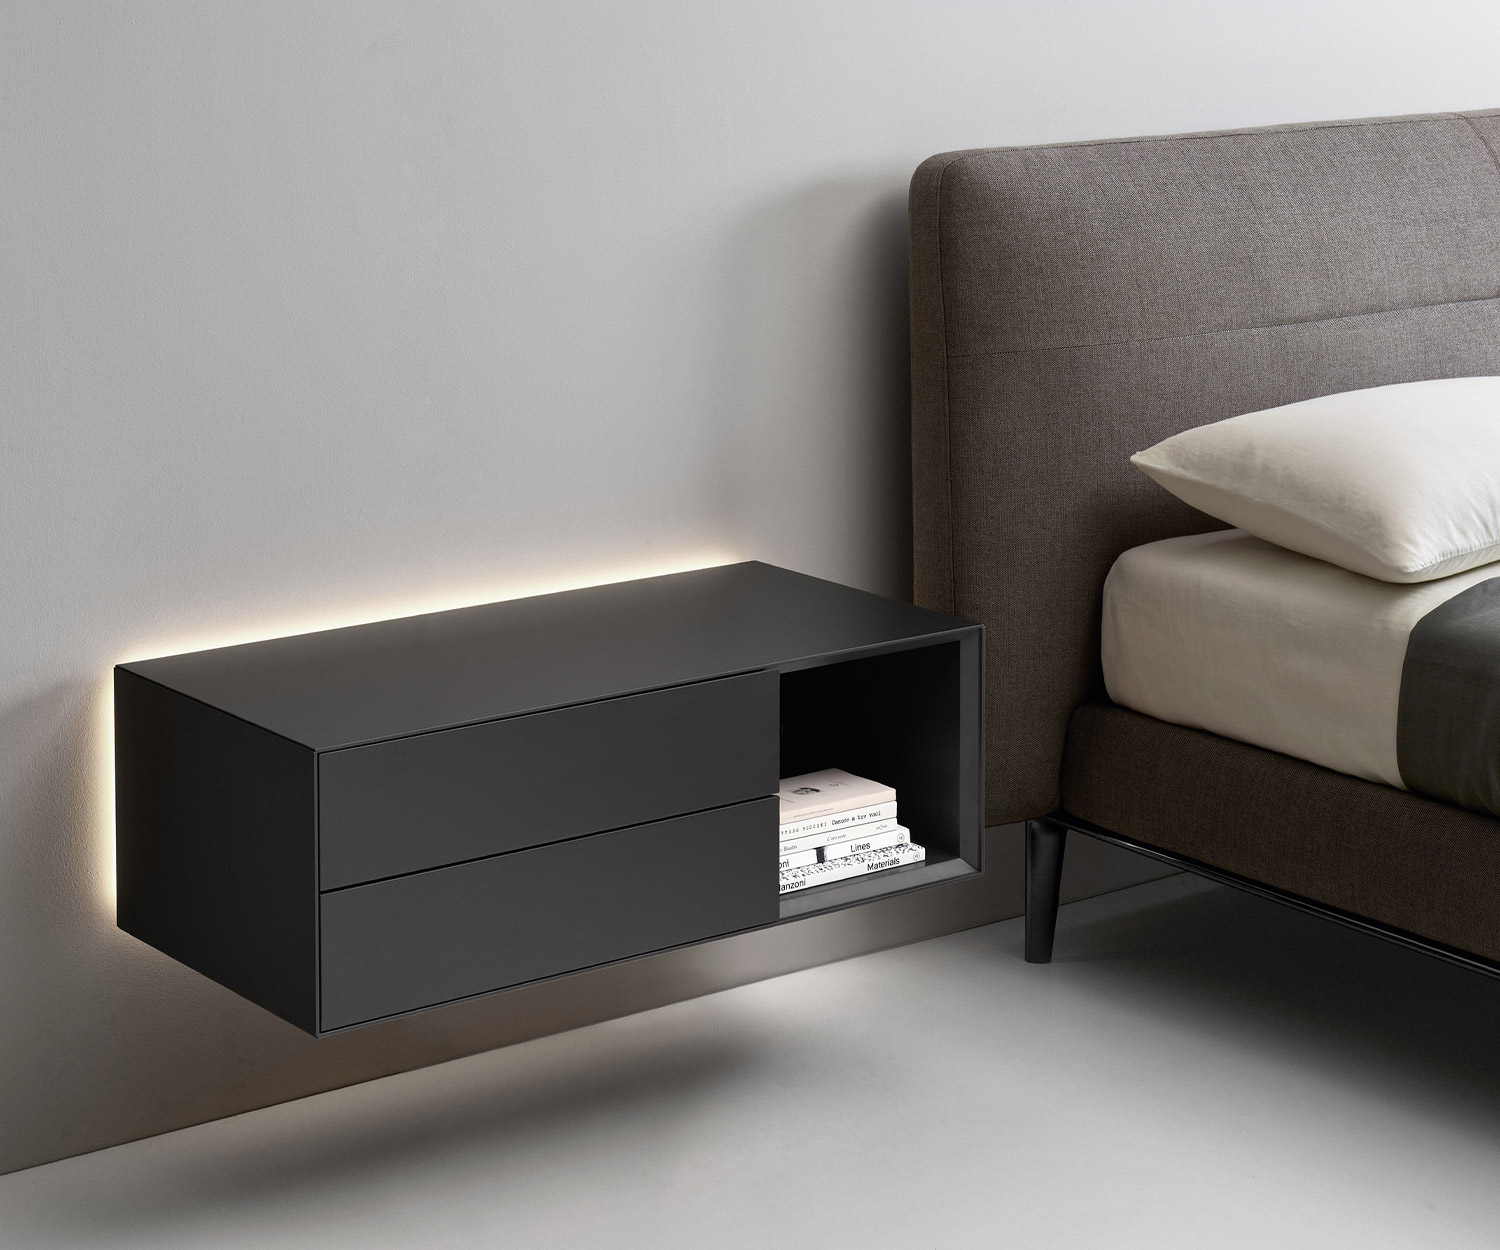 Handleless bedside cabinet Open Ecletto from Livitalia 2 drawers hanging next to bed